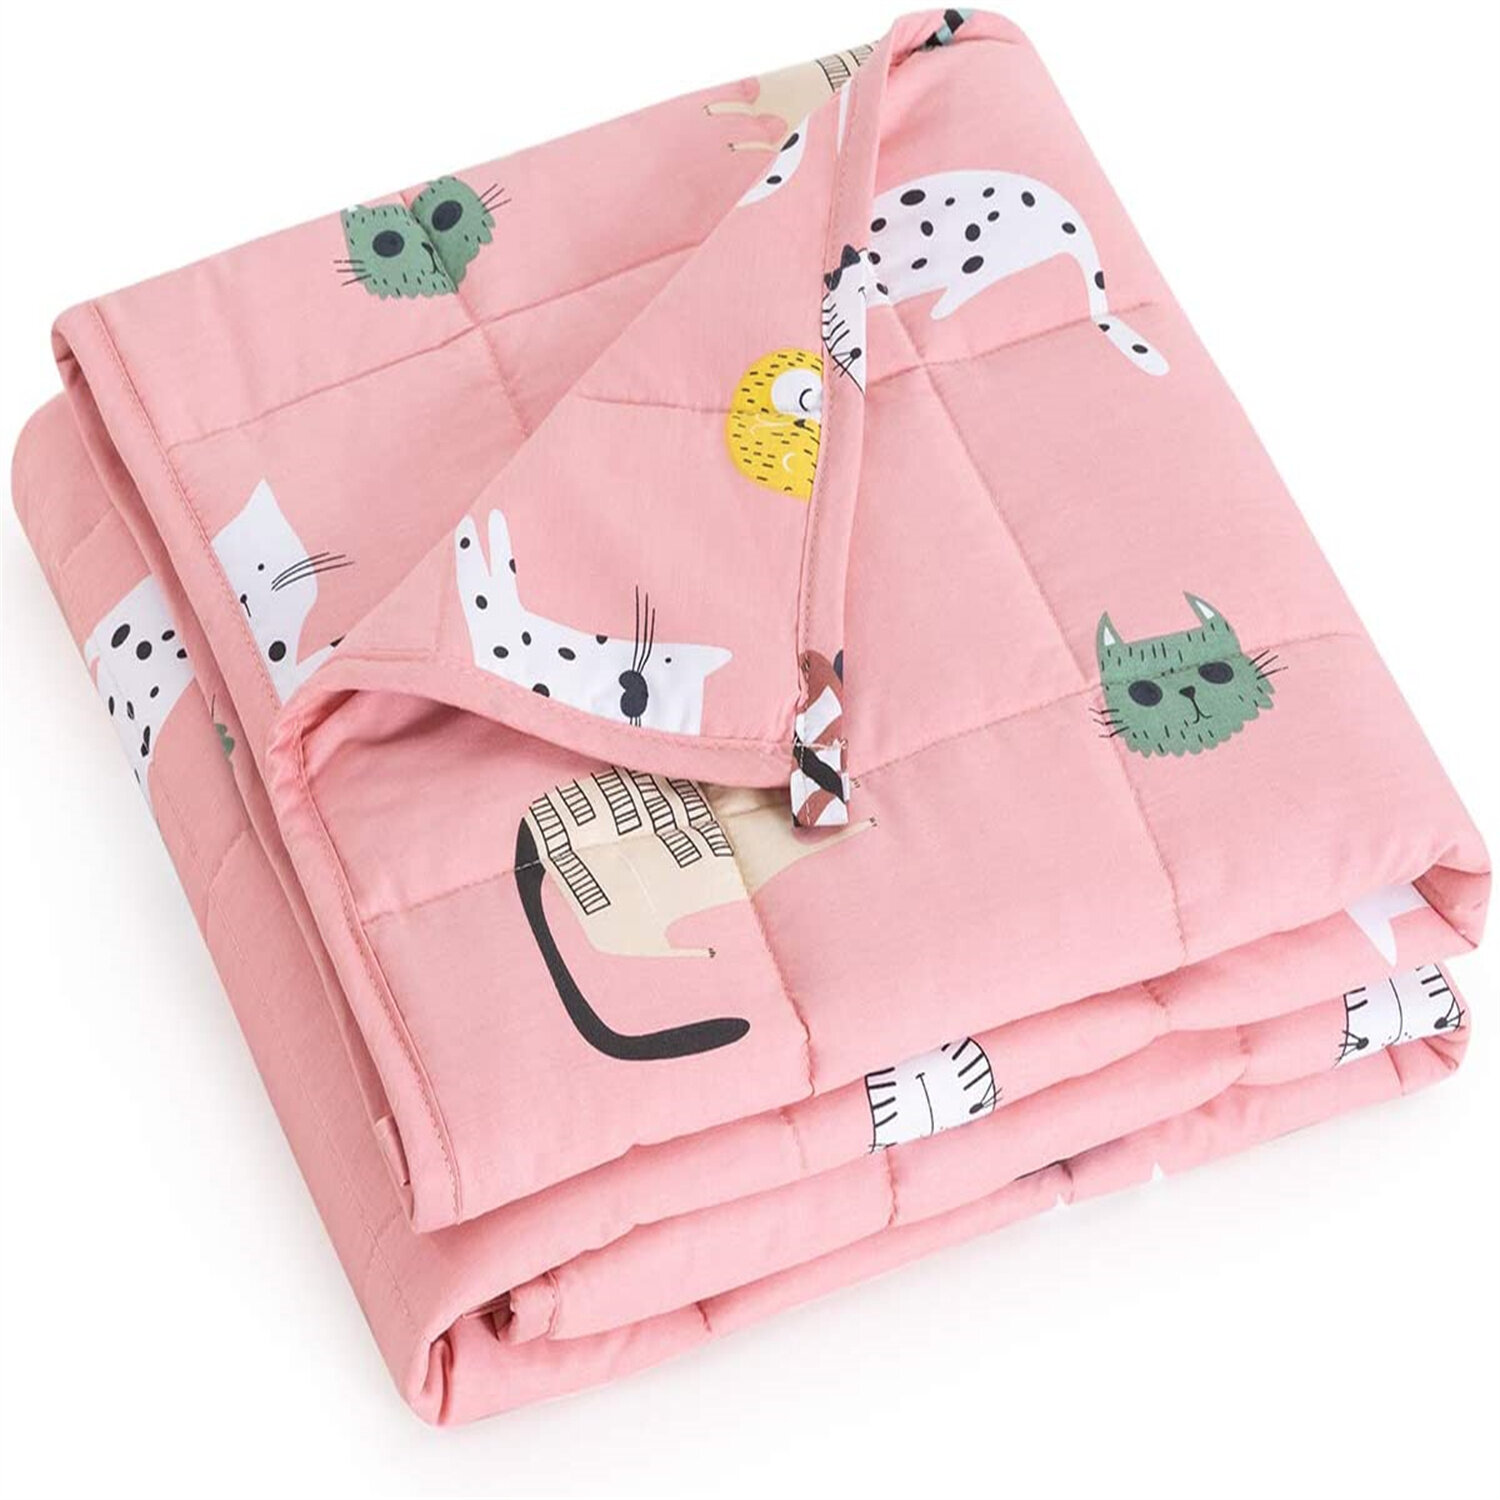 Dorm Bedding  Weighted Blanket for Adults and Kids